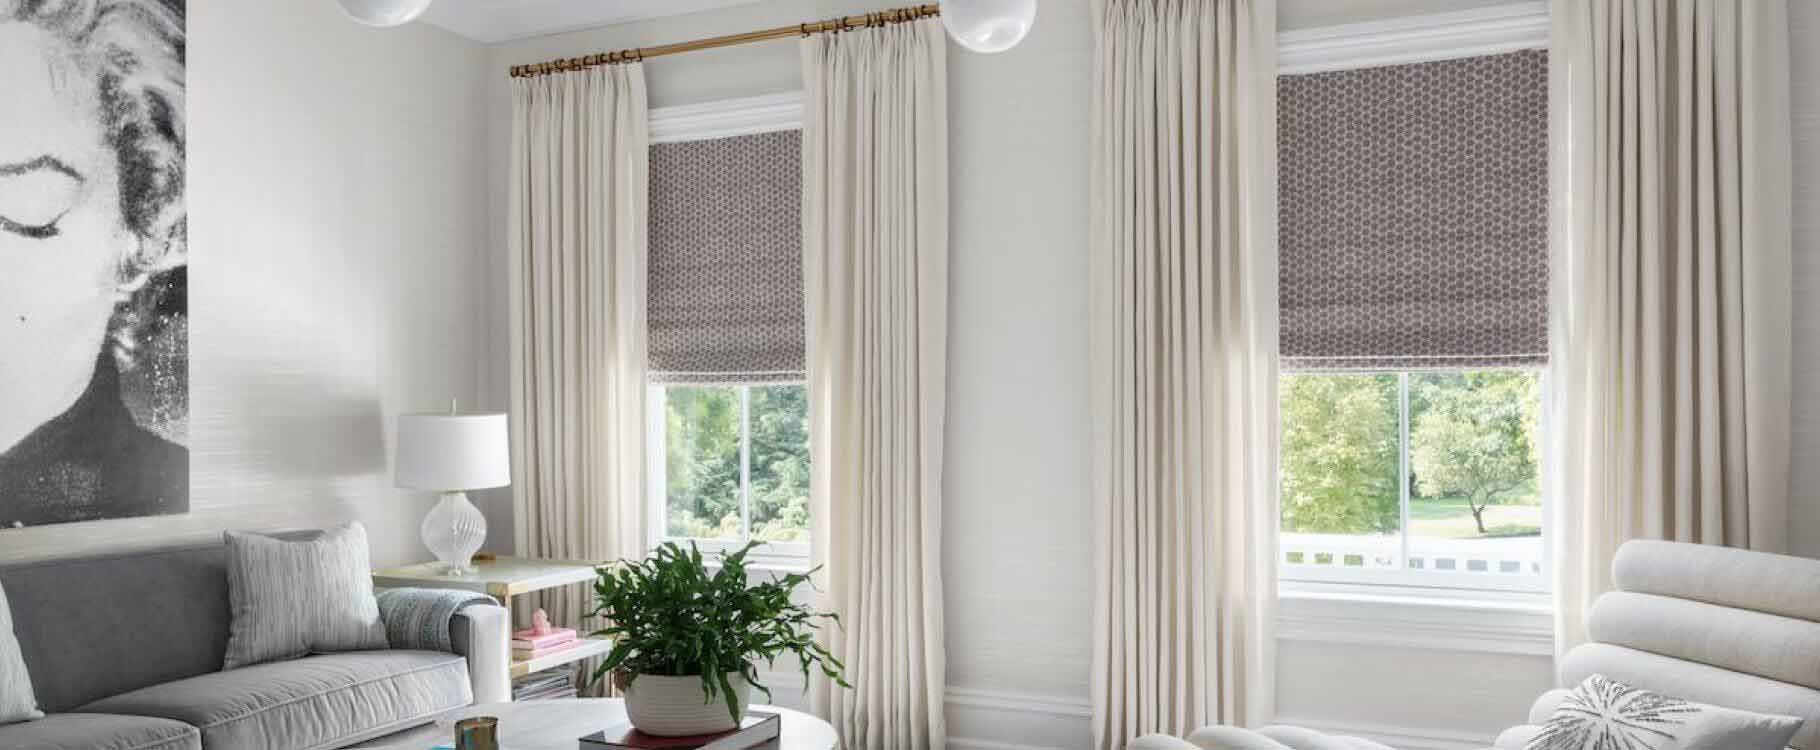 Which type of blinds are best for living rooms?